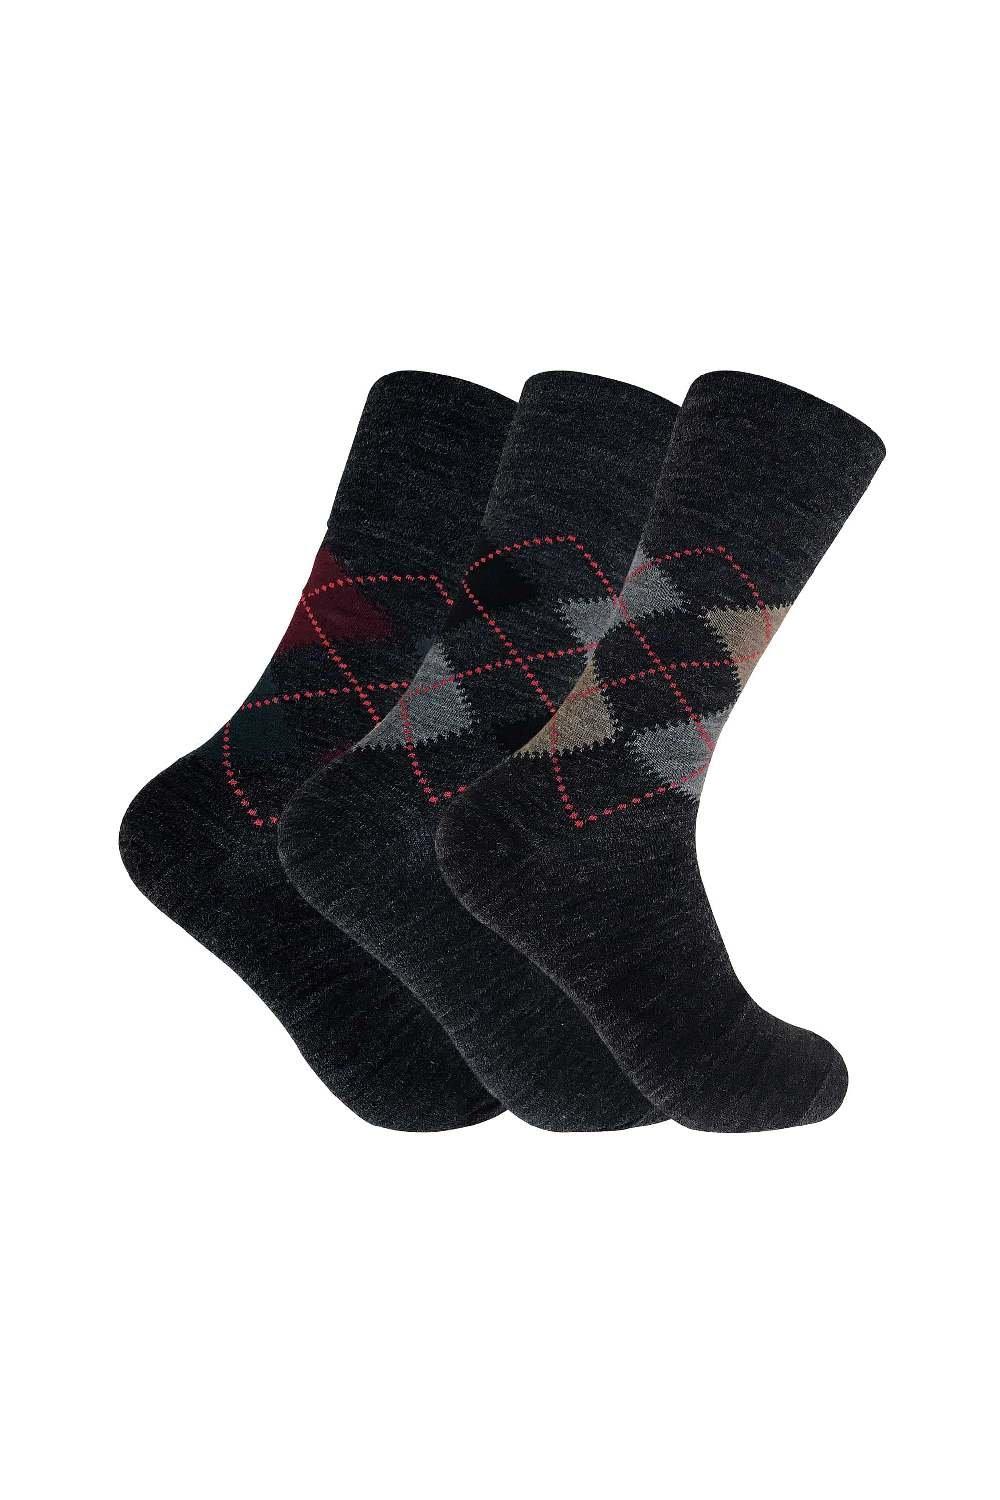 3 Pack Non Elastic Lambs Wool Blend Patterned Socks for Circulation